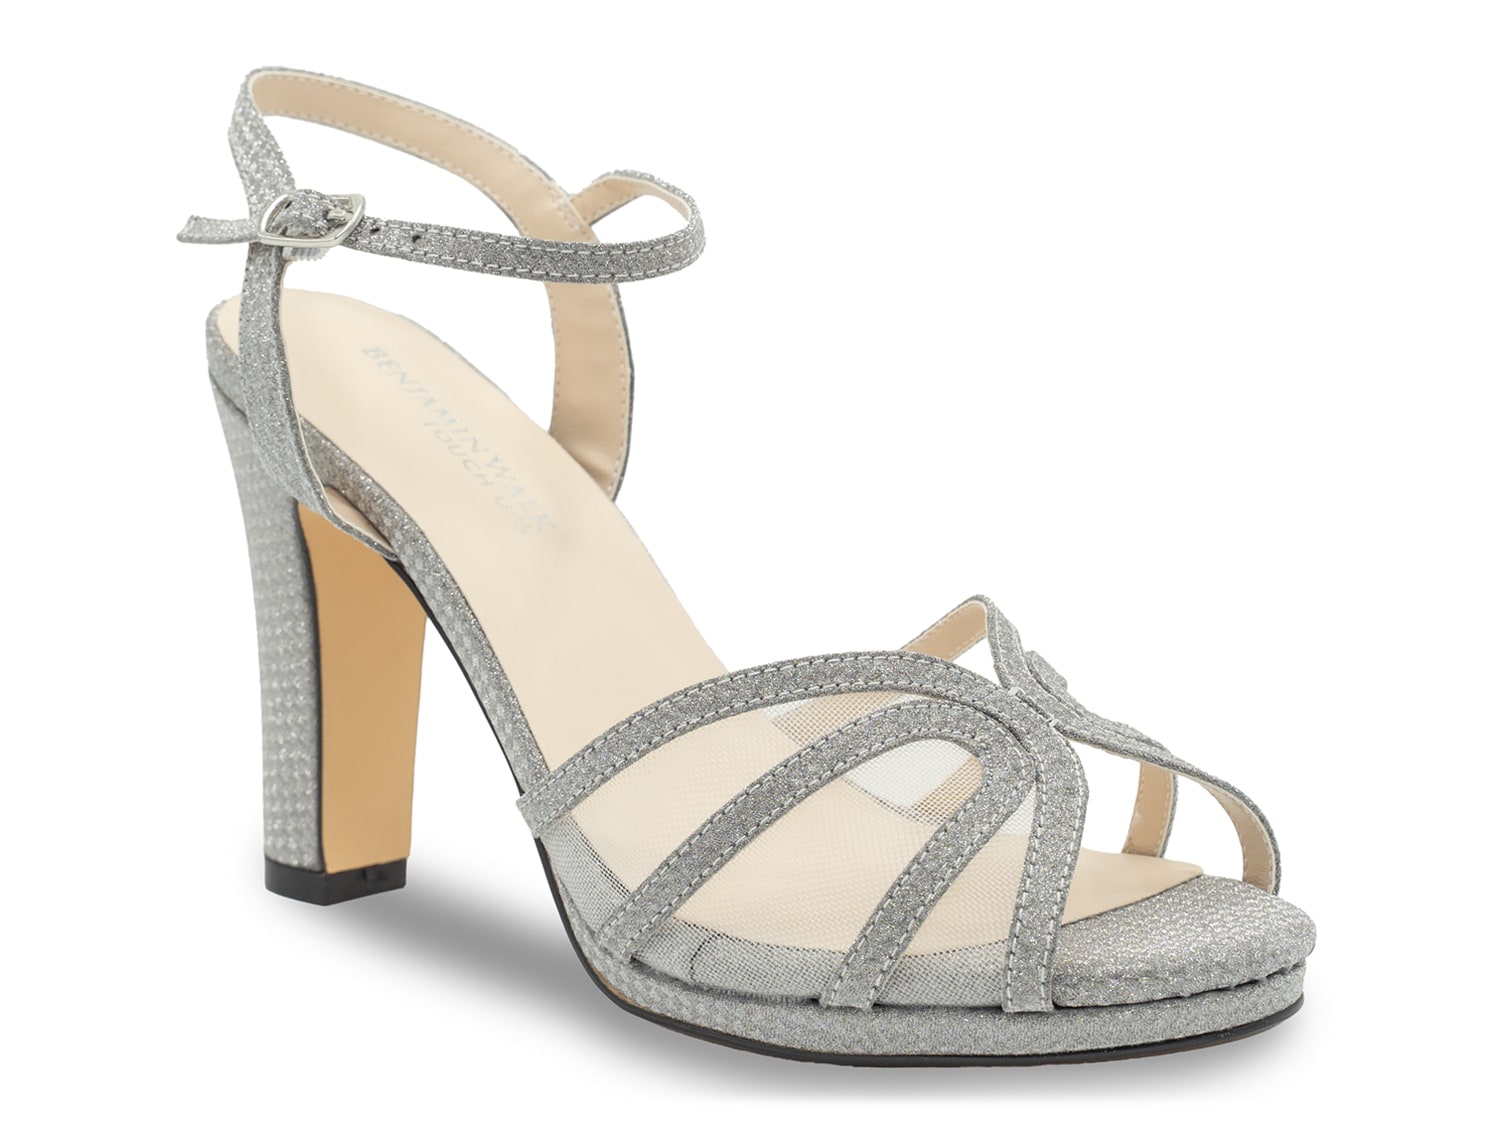 Touch Ups by Benjamin Walk Anya Sandal - Free Shipping | DSW